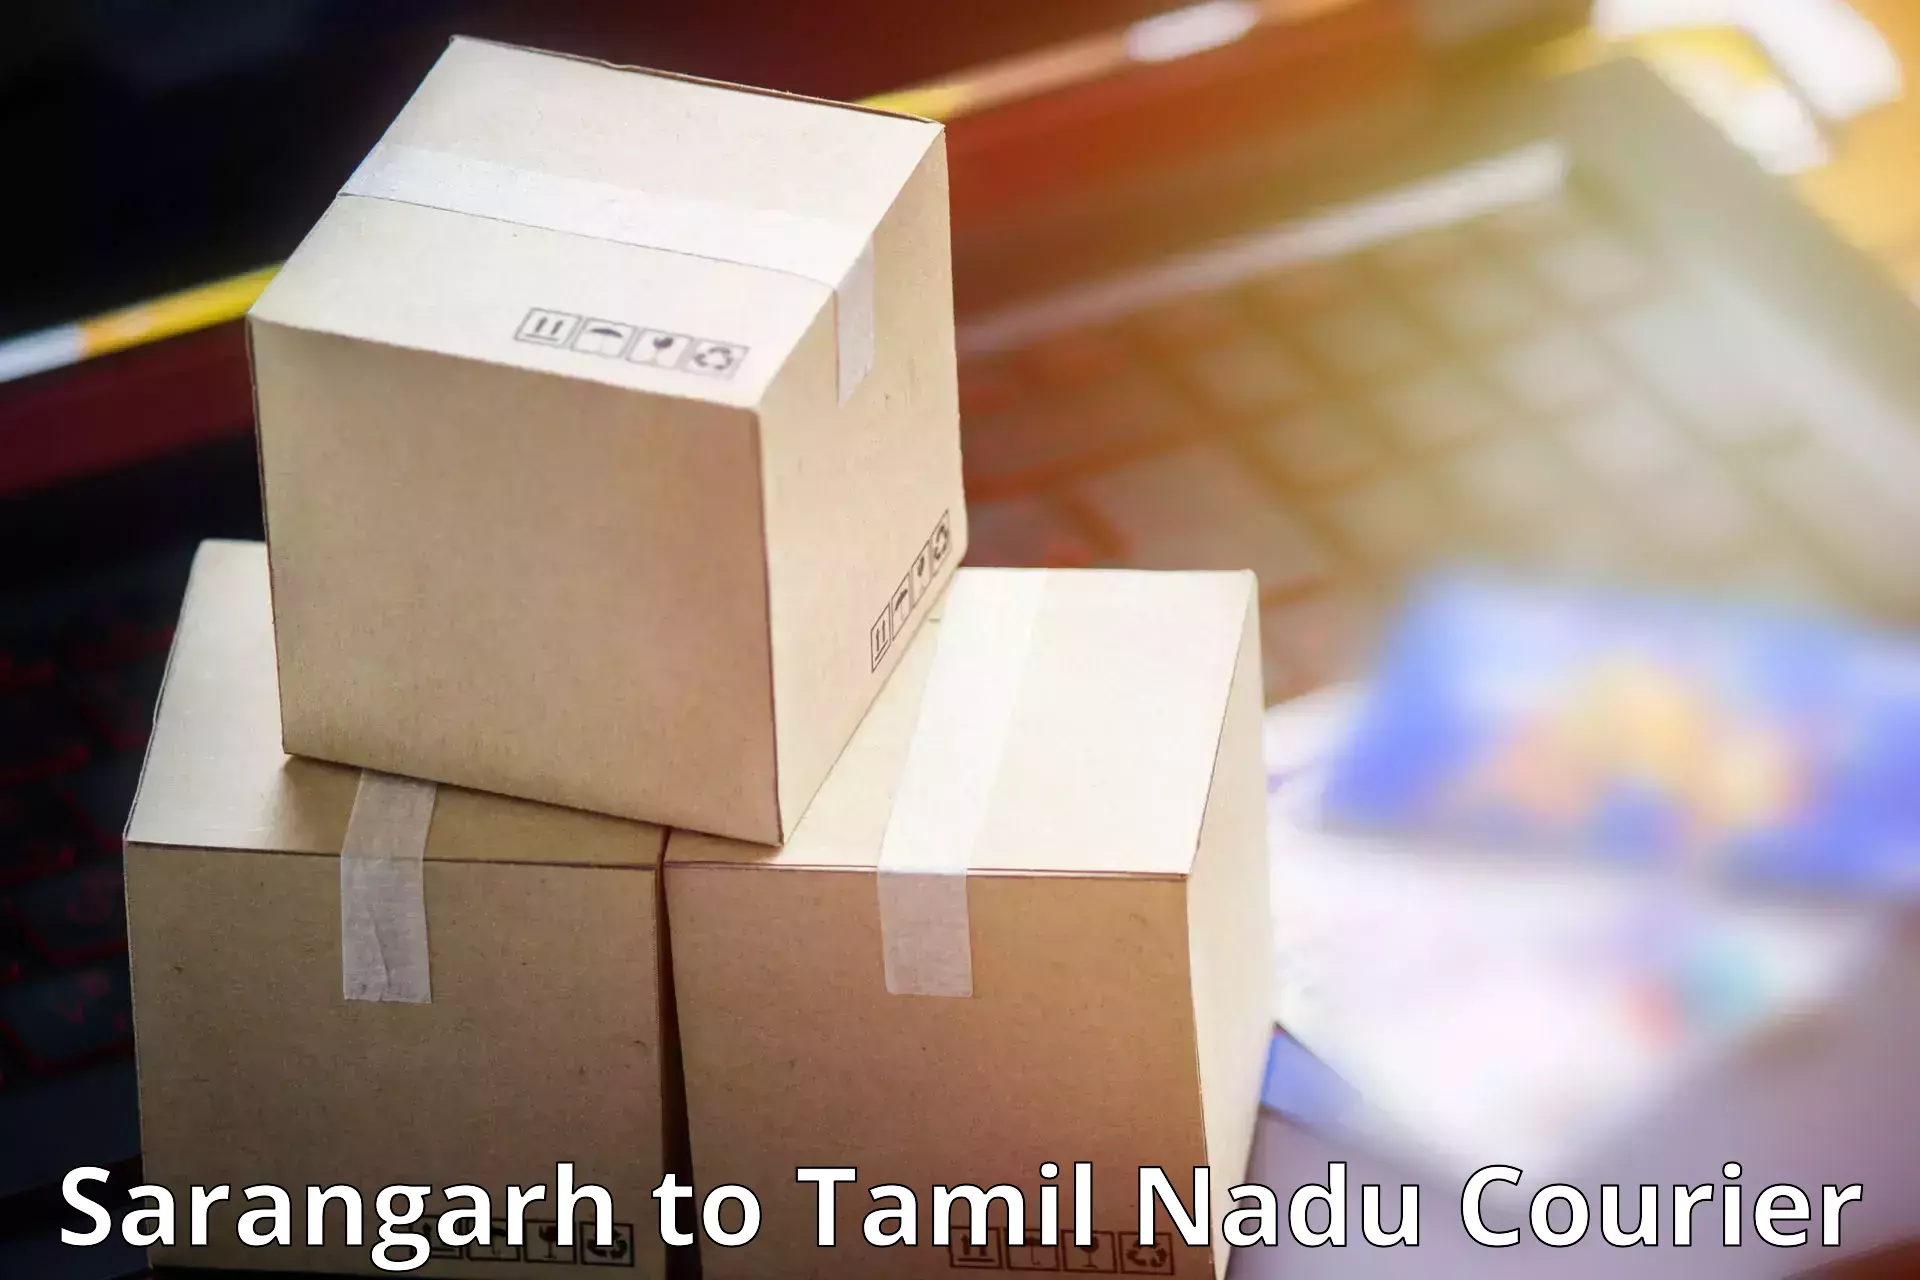 24/7 courier service Sarangarh to Meenakshi Academy of Higher Education and Research Chennai